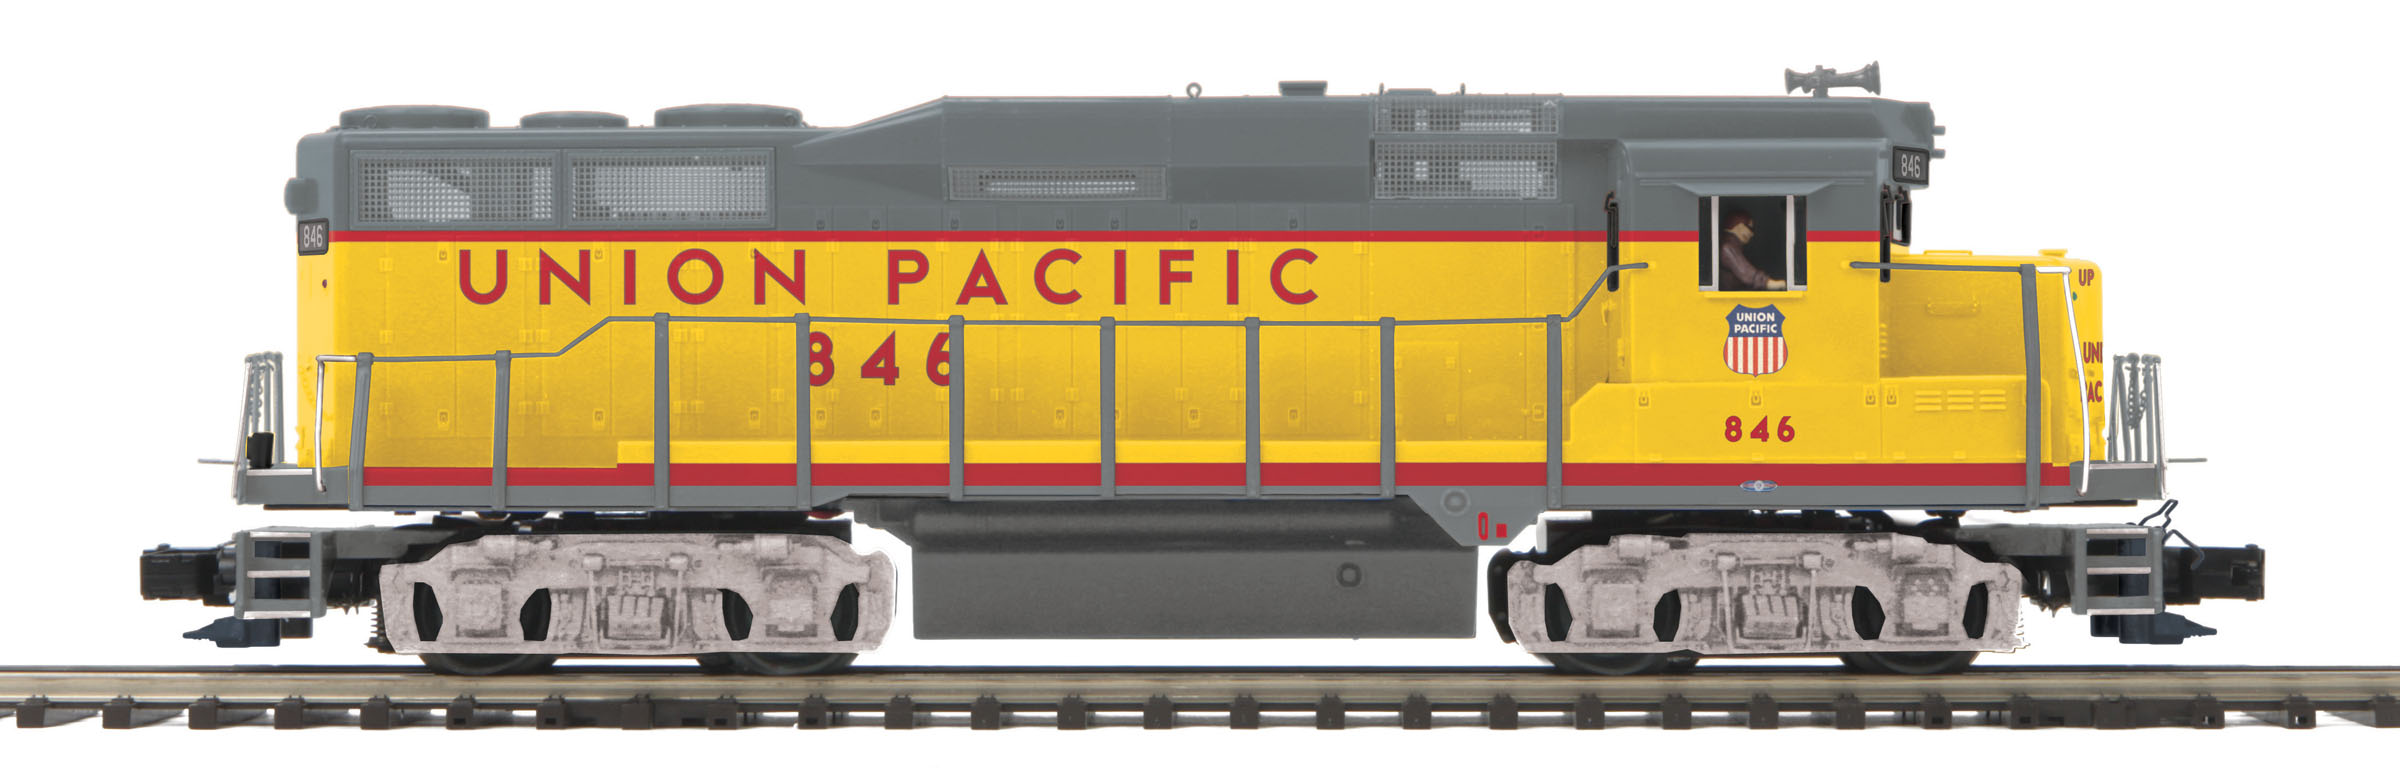 mth trains for sale